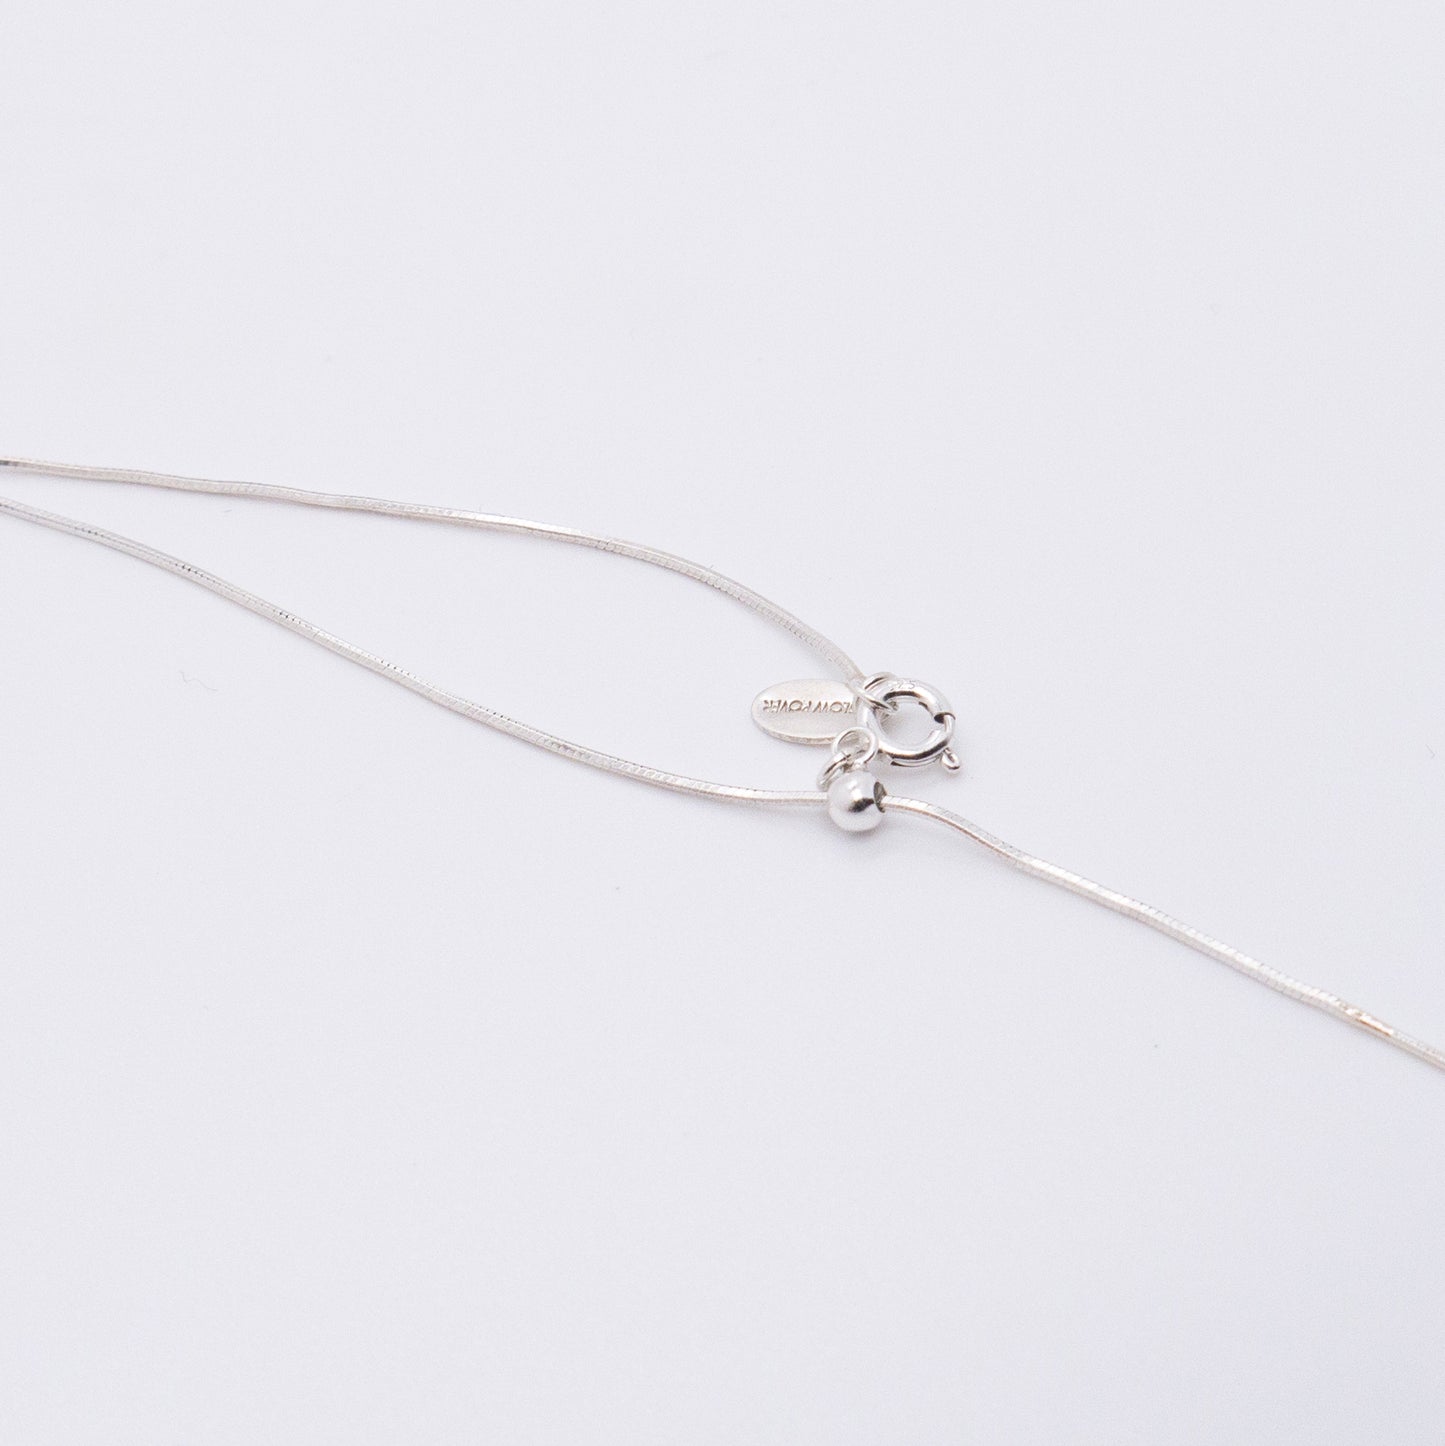 Meteor - Lost Stars Silver Dainty Necklace (Silver/18K White Gold)